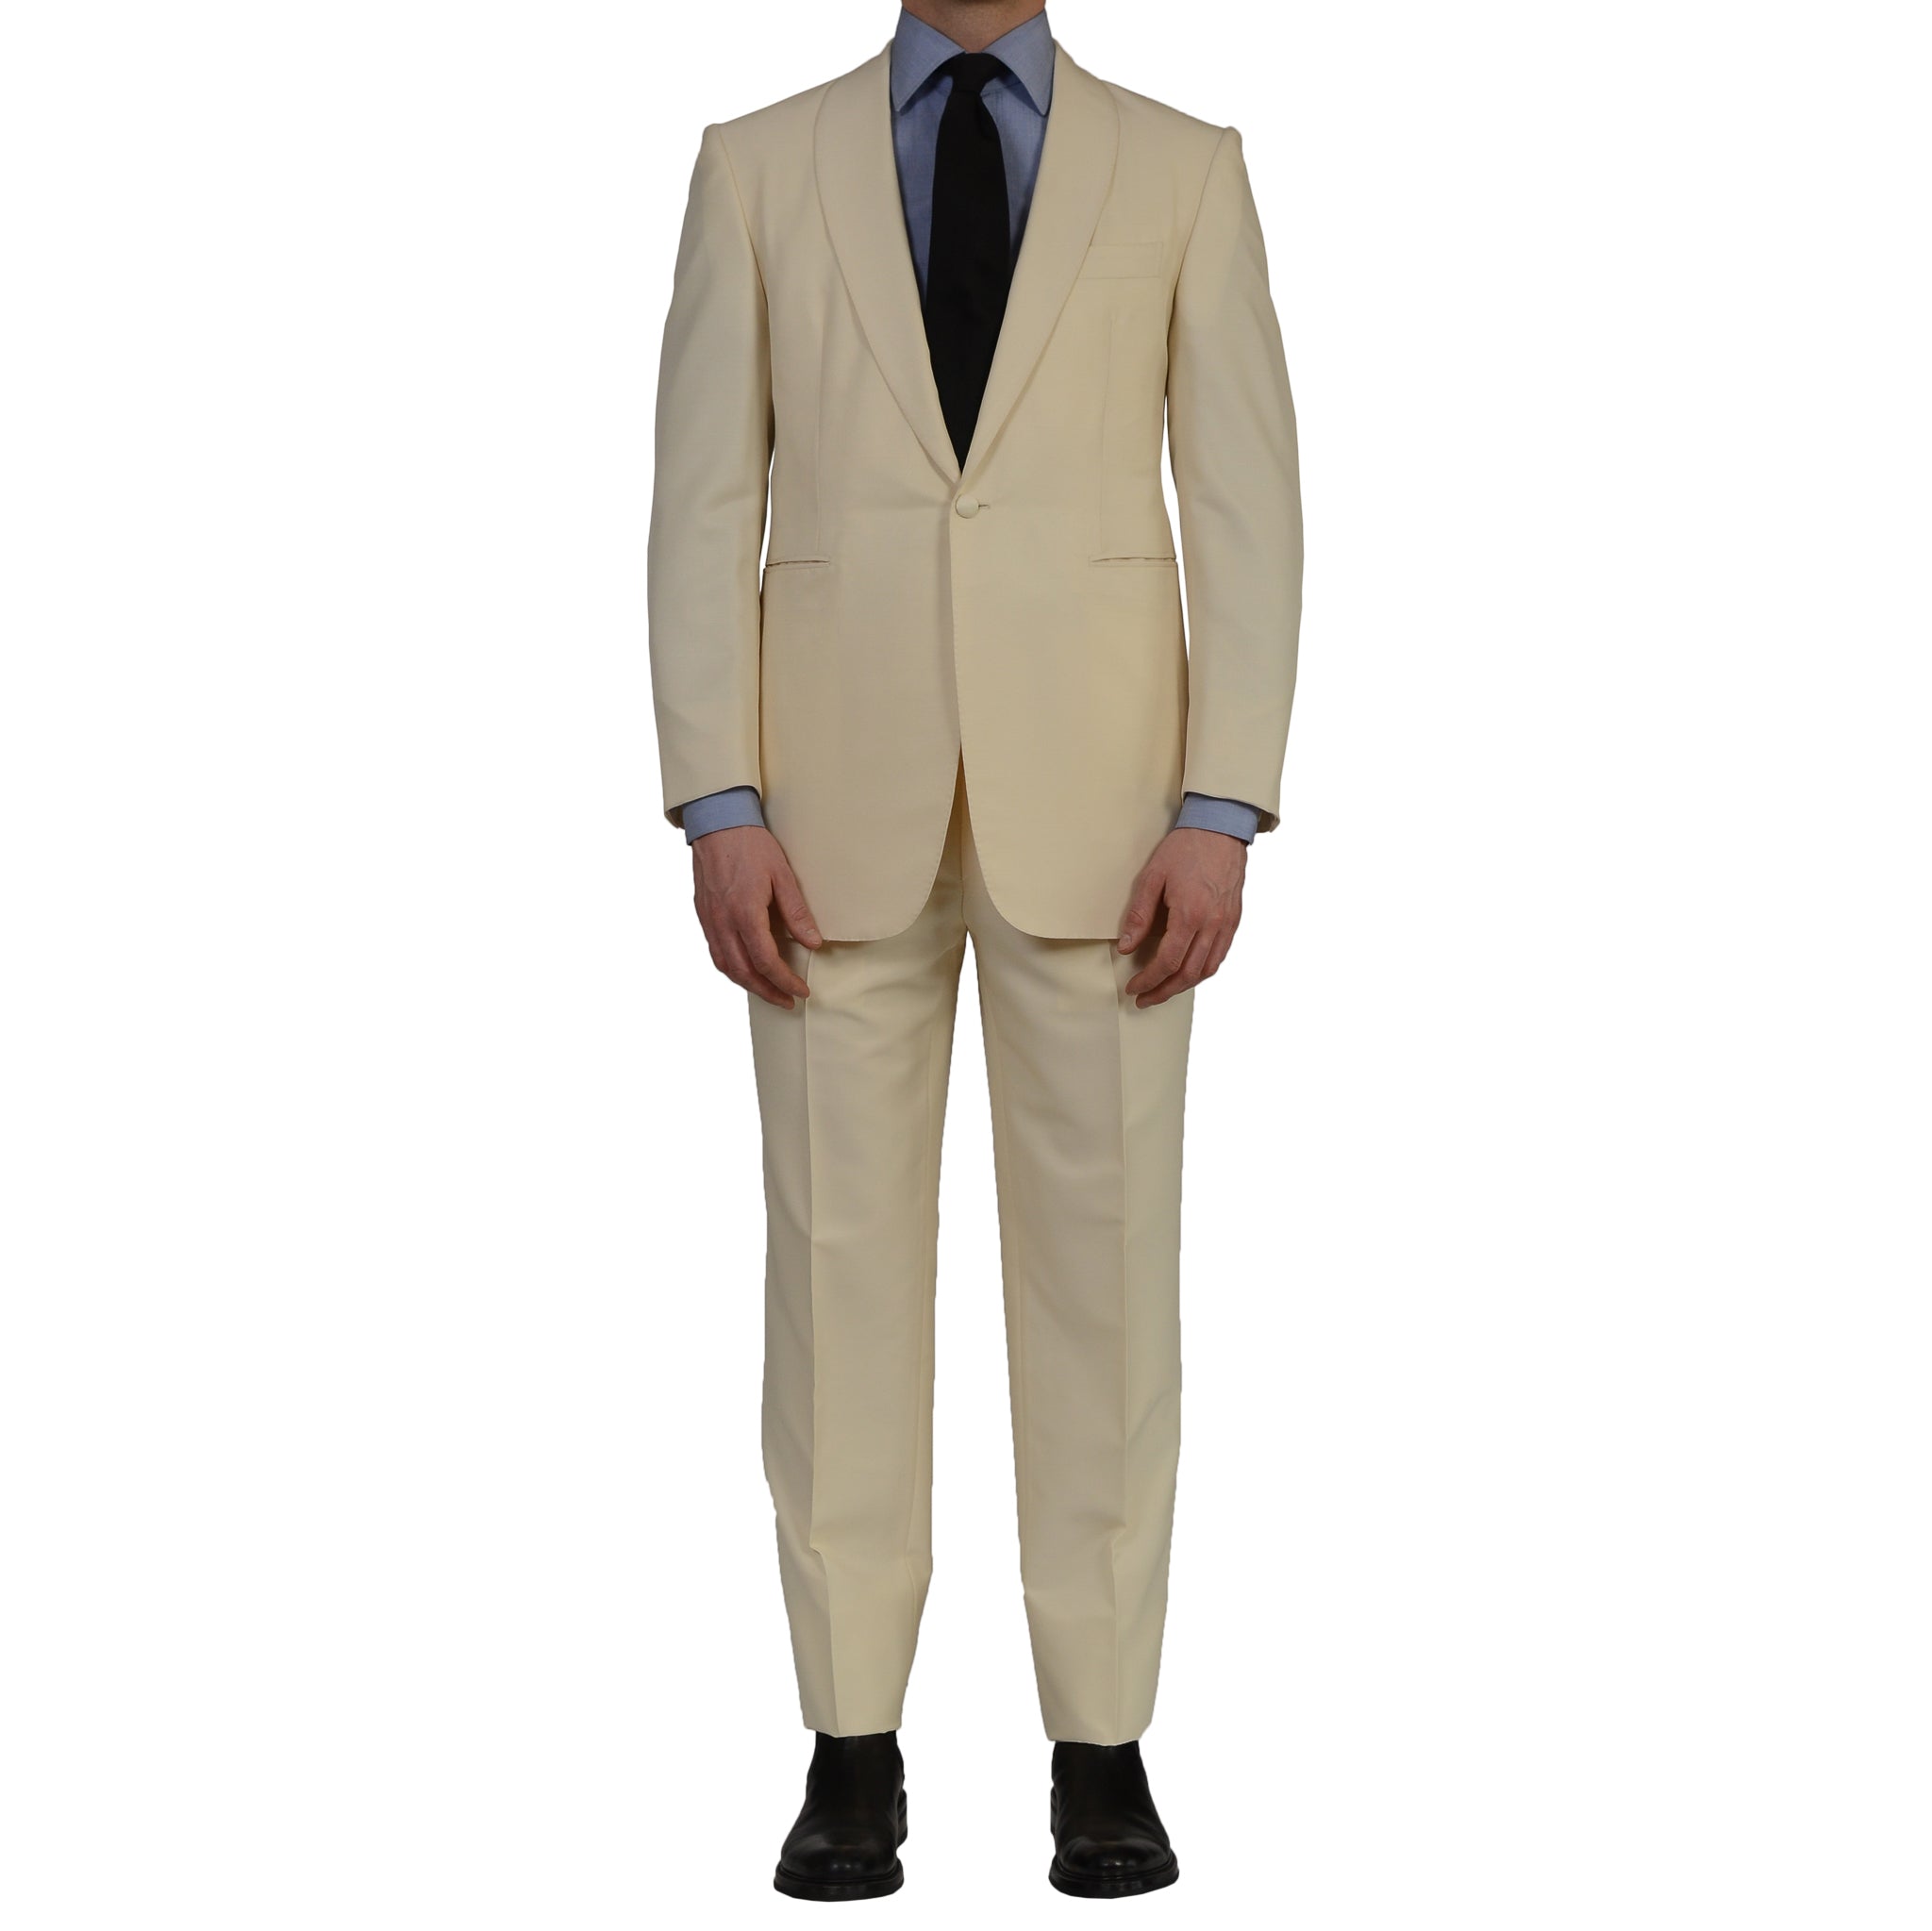 GARY ANDERSON by D'Avenza Cream 1 Button Shawl Collar Tuxedo Suit NEW